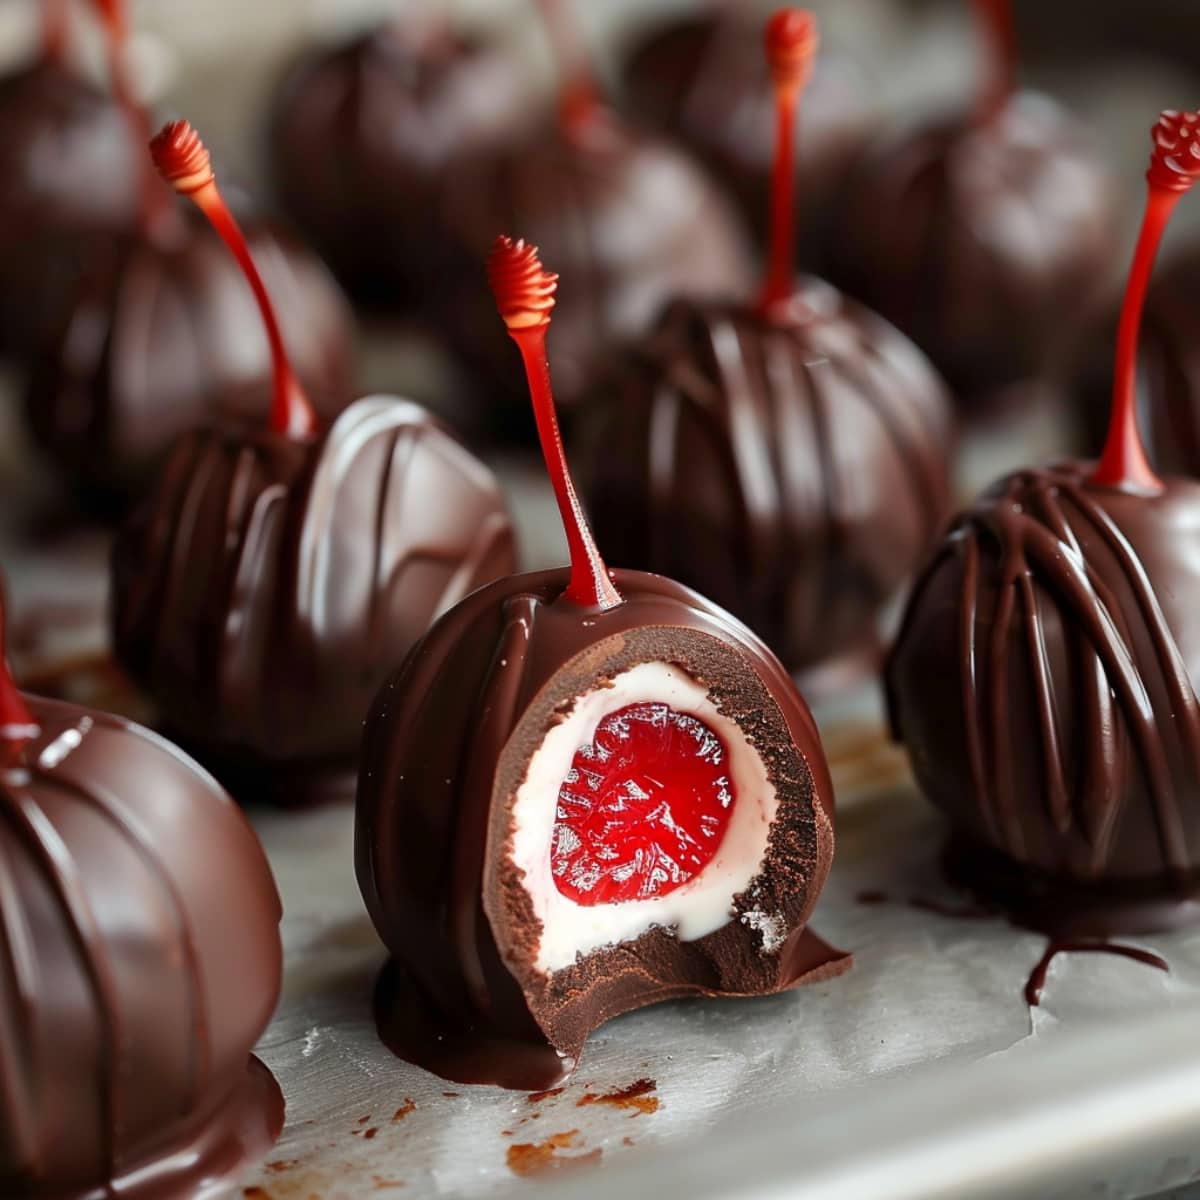 Maraschino cherries covered with chocolates with vanilla fillings inside